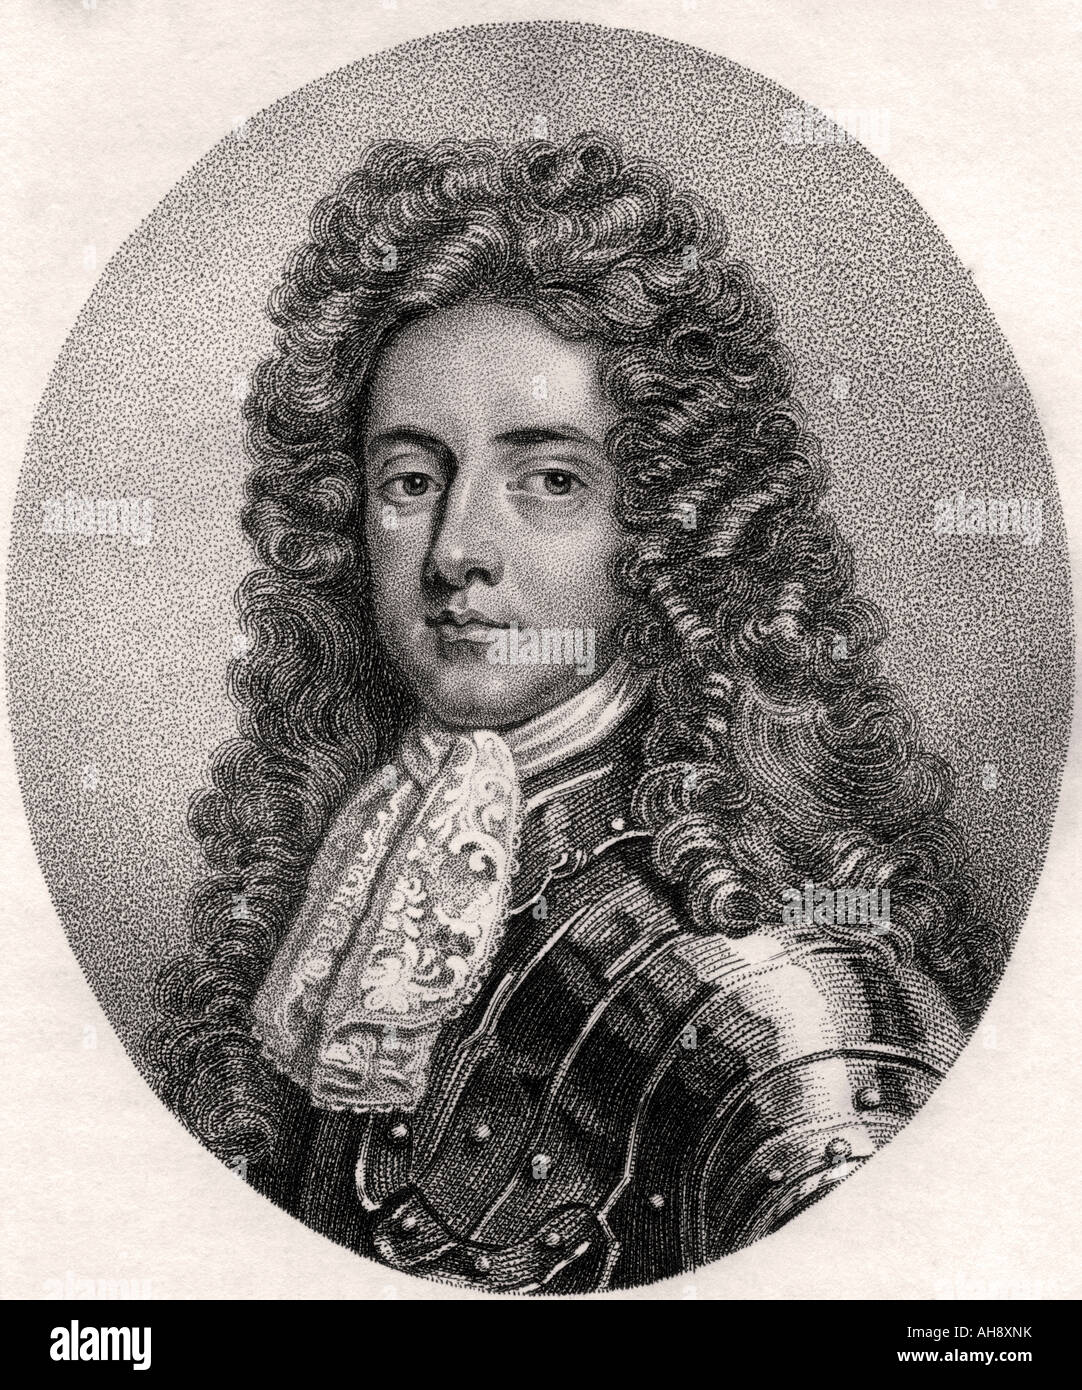 Henry Booth, 1st Earl of Warrington, Lord Delamer, 1652 - 1694. English politician, Mayor of Chester and author. Stock Photo